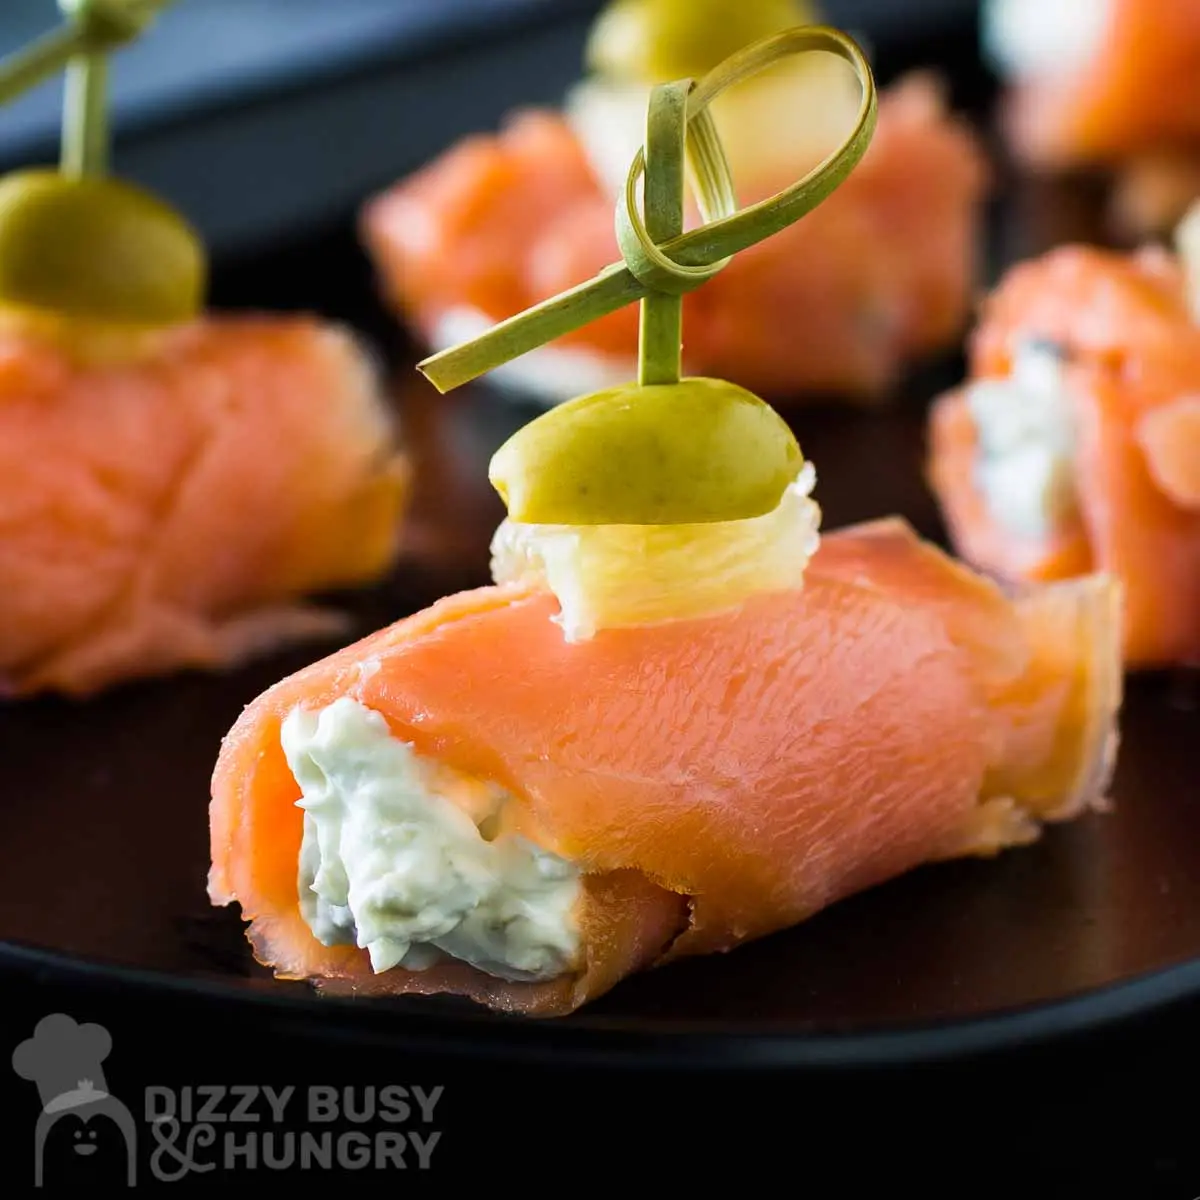 smoked salmon and cheese - Does smoked salmon go with cheese